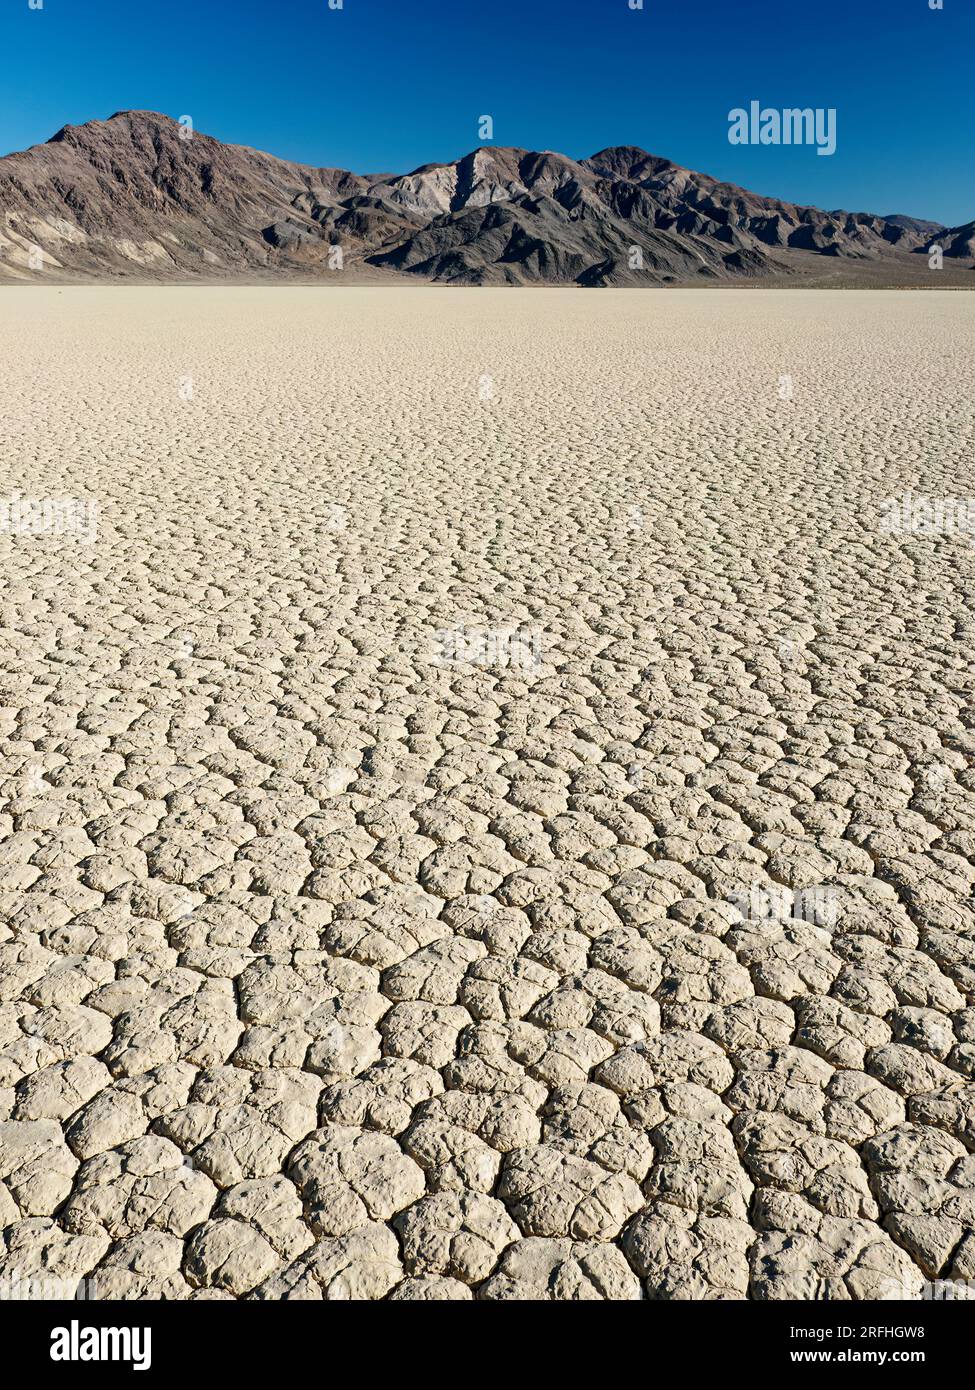 A view of the Racetrack, a playa or dried up lakebed, in Death Valley National Park, California, USA. Stock Photo